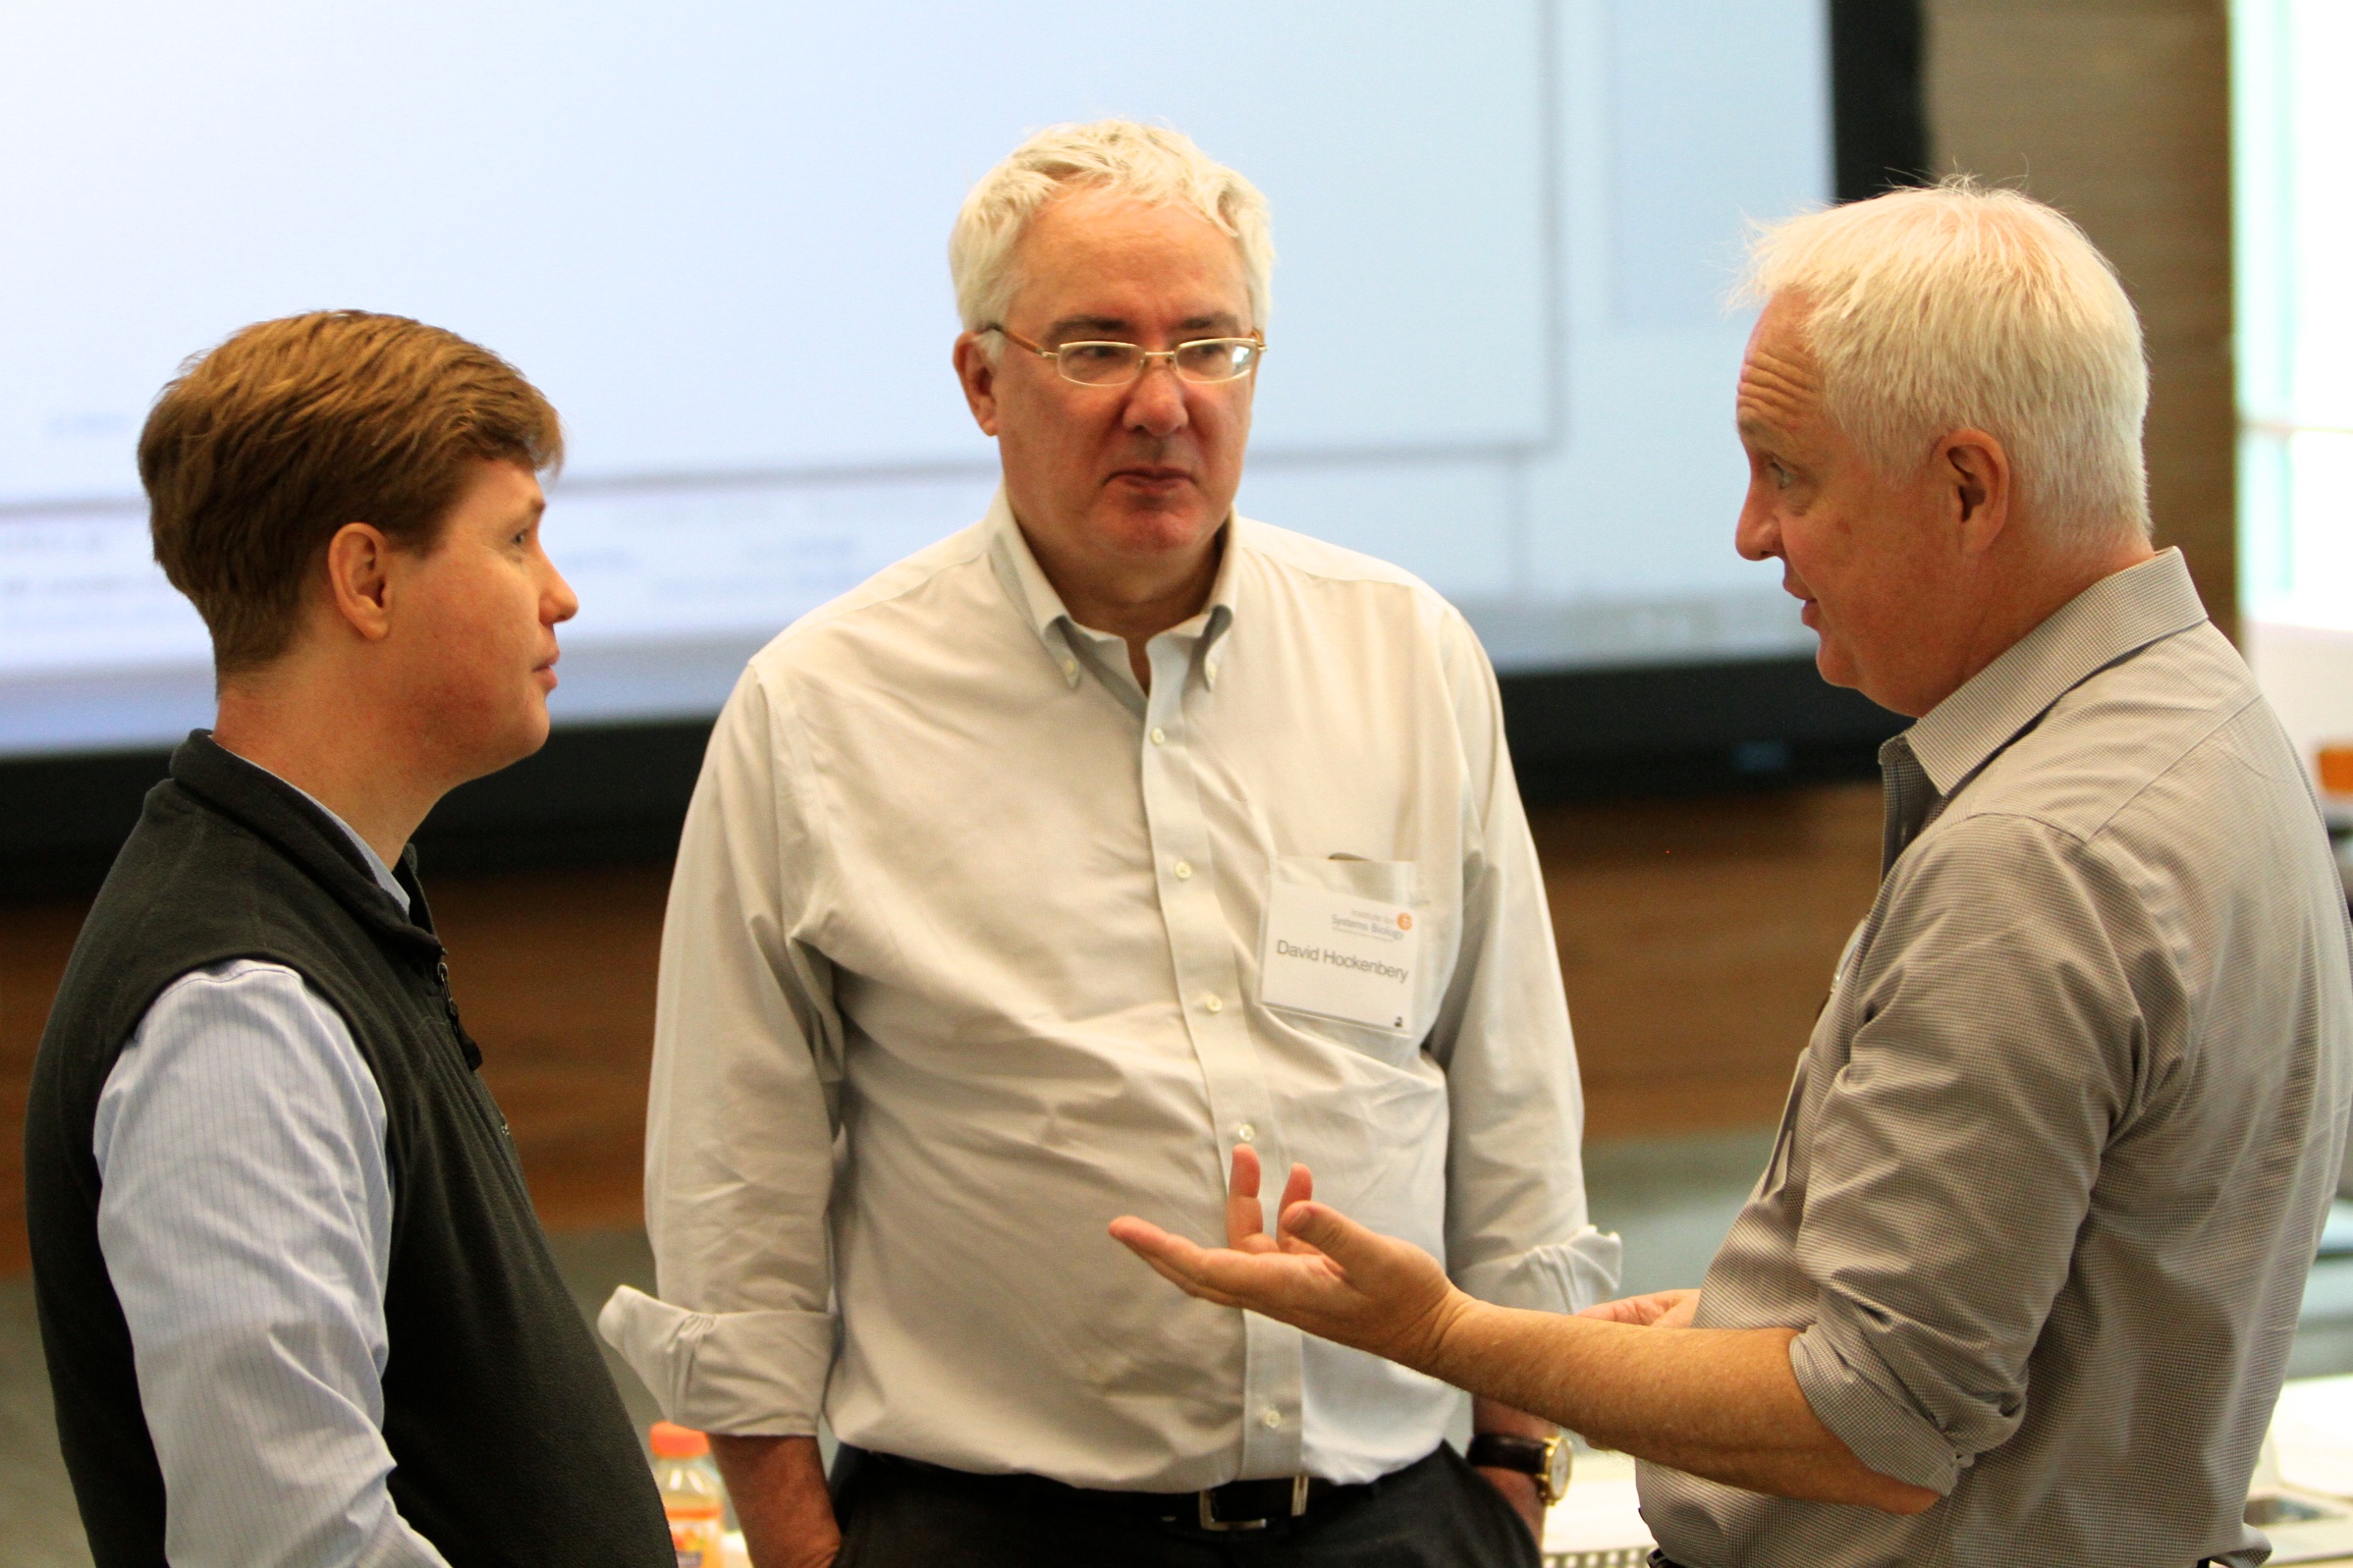 ISB's Dr. Nathan Price, left, chats with FHCRC's Dr. David Hockenbery and Dr. Eric Holland during a meeting held at Institute for Systems Biology to discuss potential collaborations on cancer research.